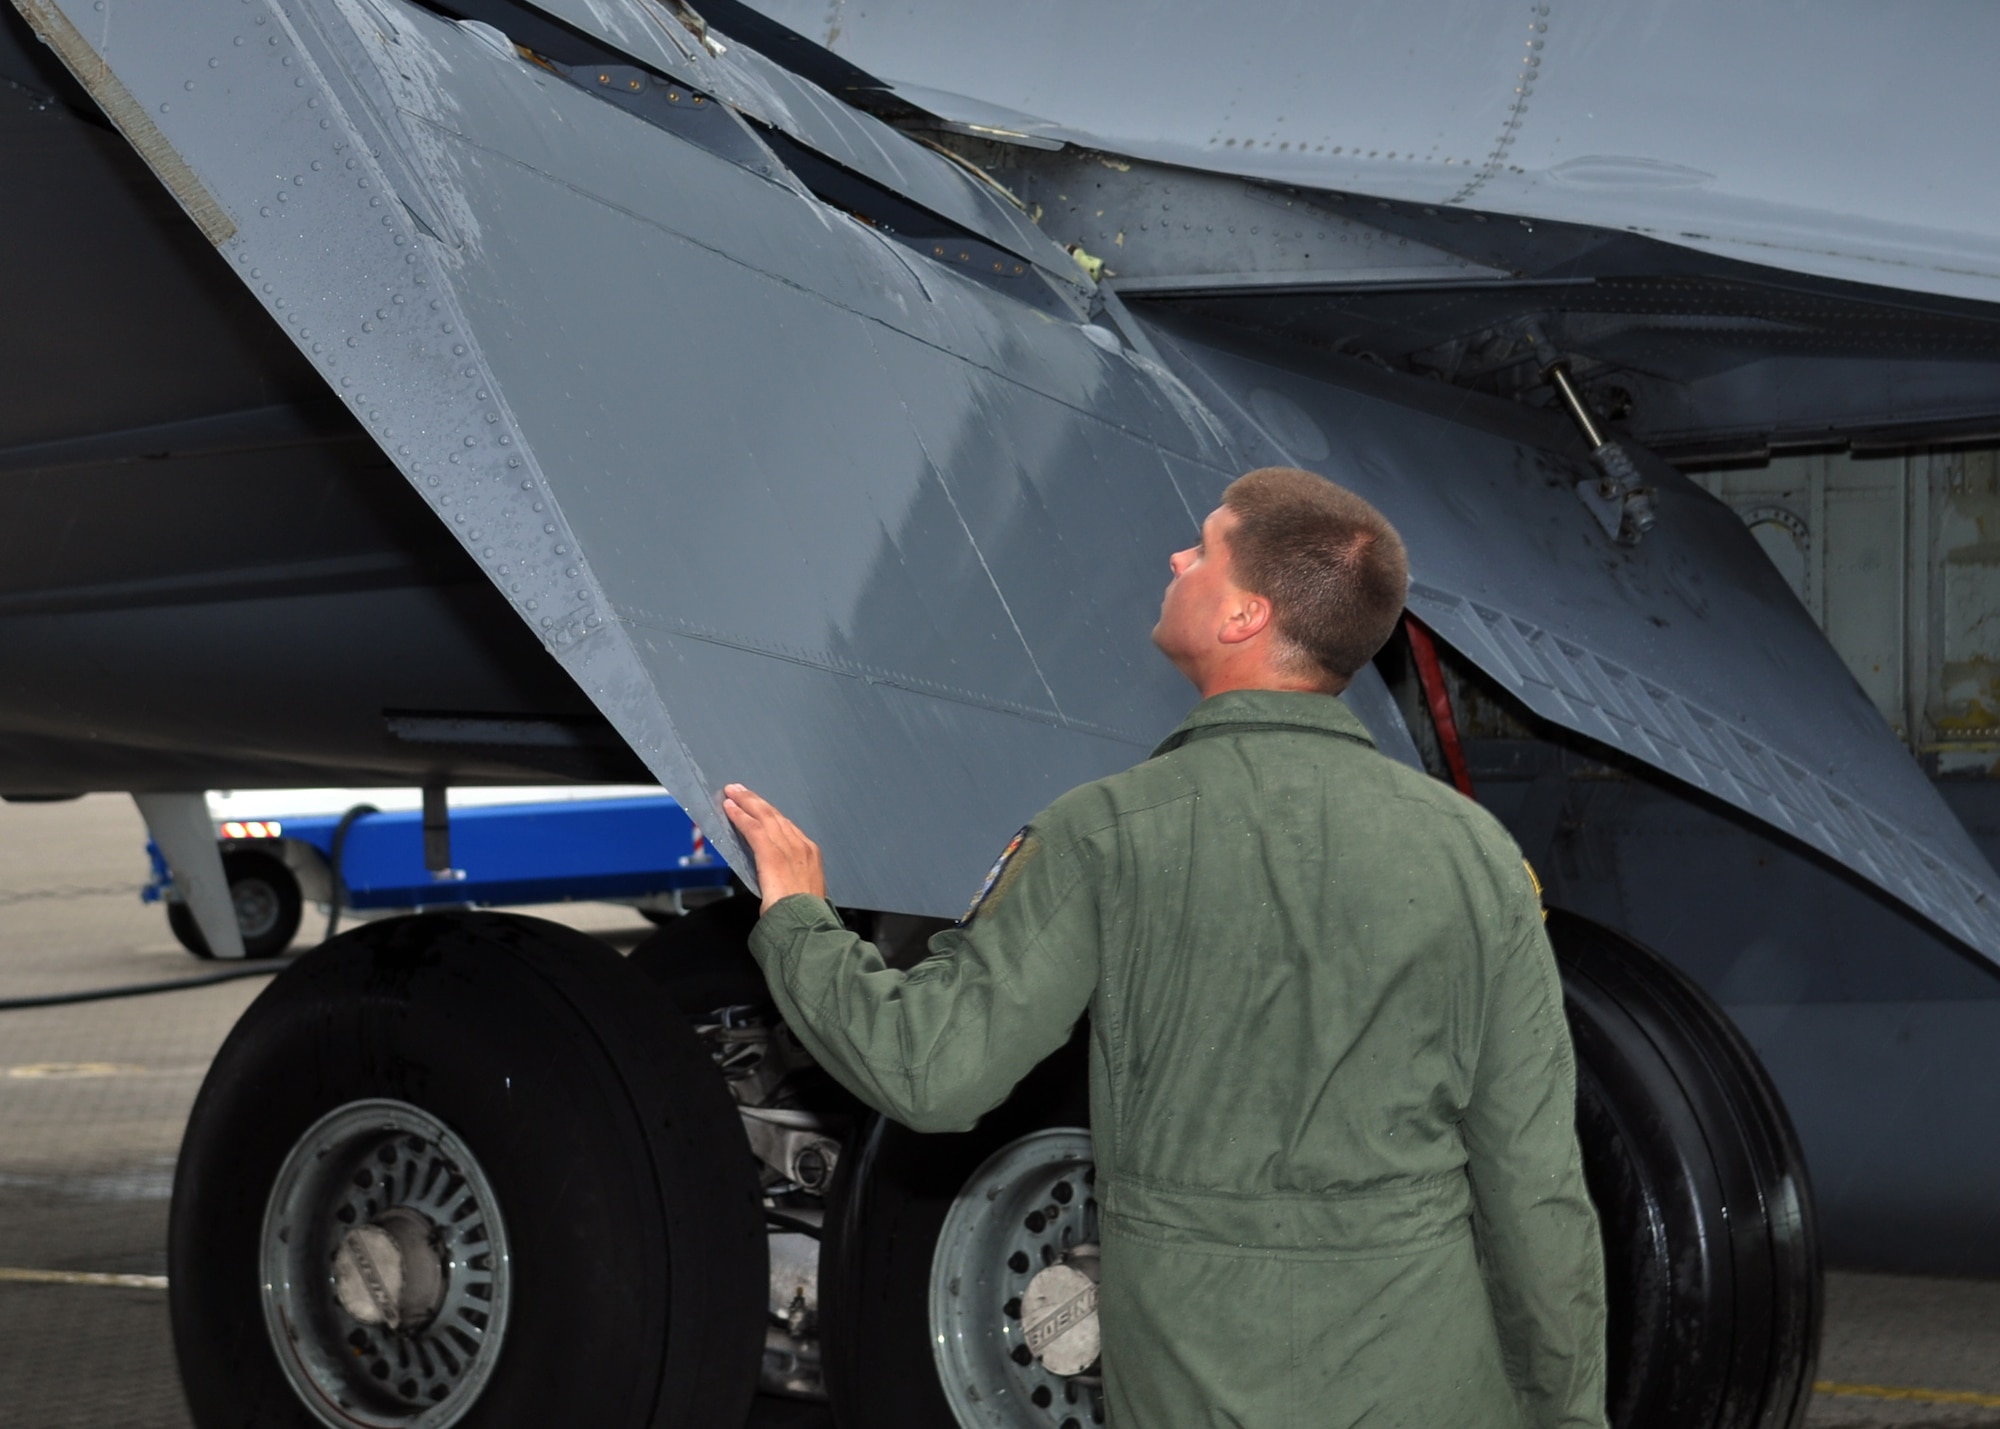 Staff Sgt. Keith Shaff, 100th Air Refueling Wing flying crew chief, conducts a pre-flight inspection on a KC-135R Stratotanker Sept. 16, 2013, on Main Air Station Ørland, Norway. Shaff and other maintainers kept aircraft ready to carry out a multitude of missions during the Arctic Challenge exercise, which included participation from Sweden, Finland, the U.K., Norway, the U.S. and NATO.